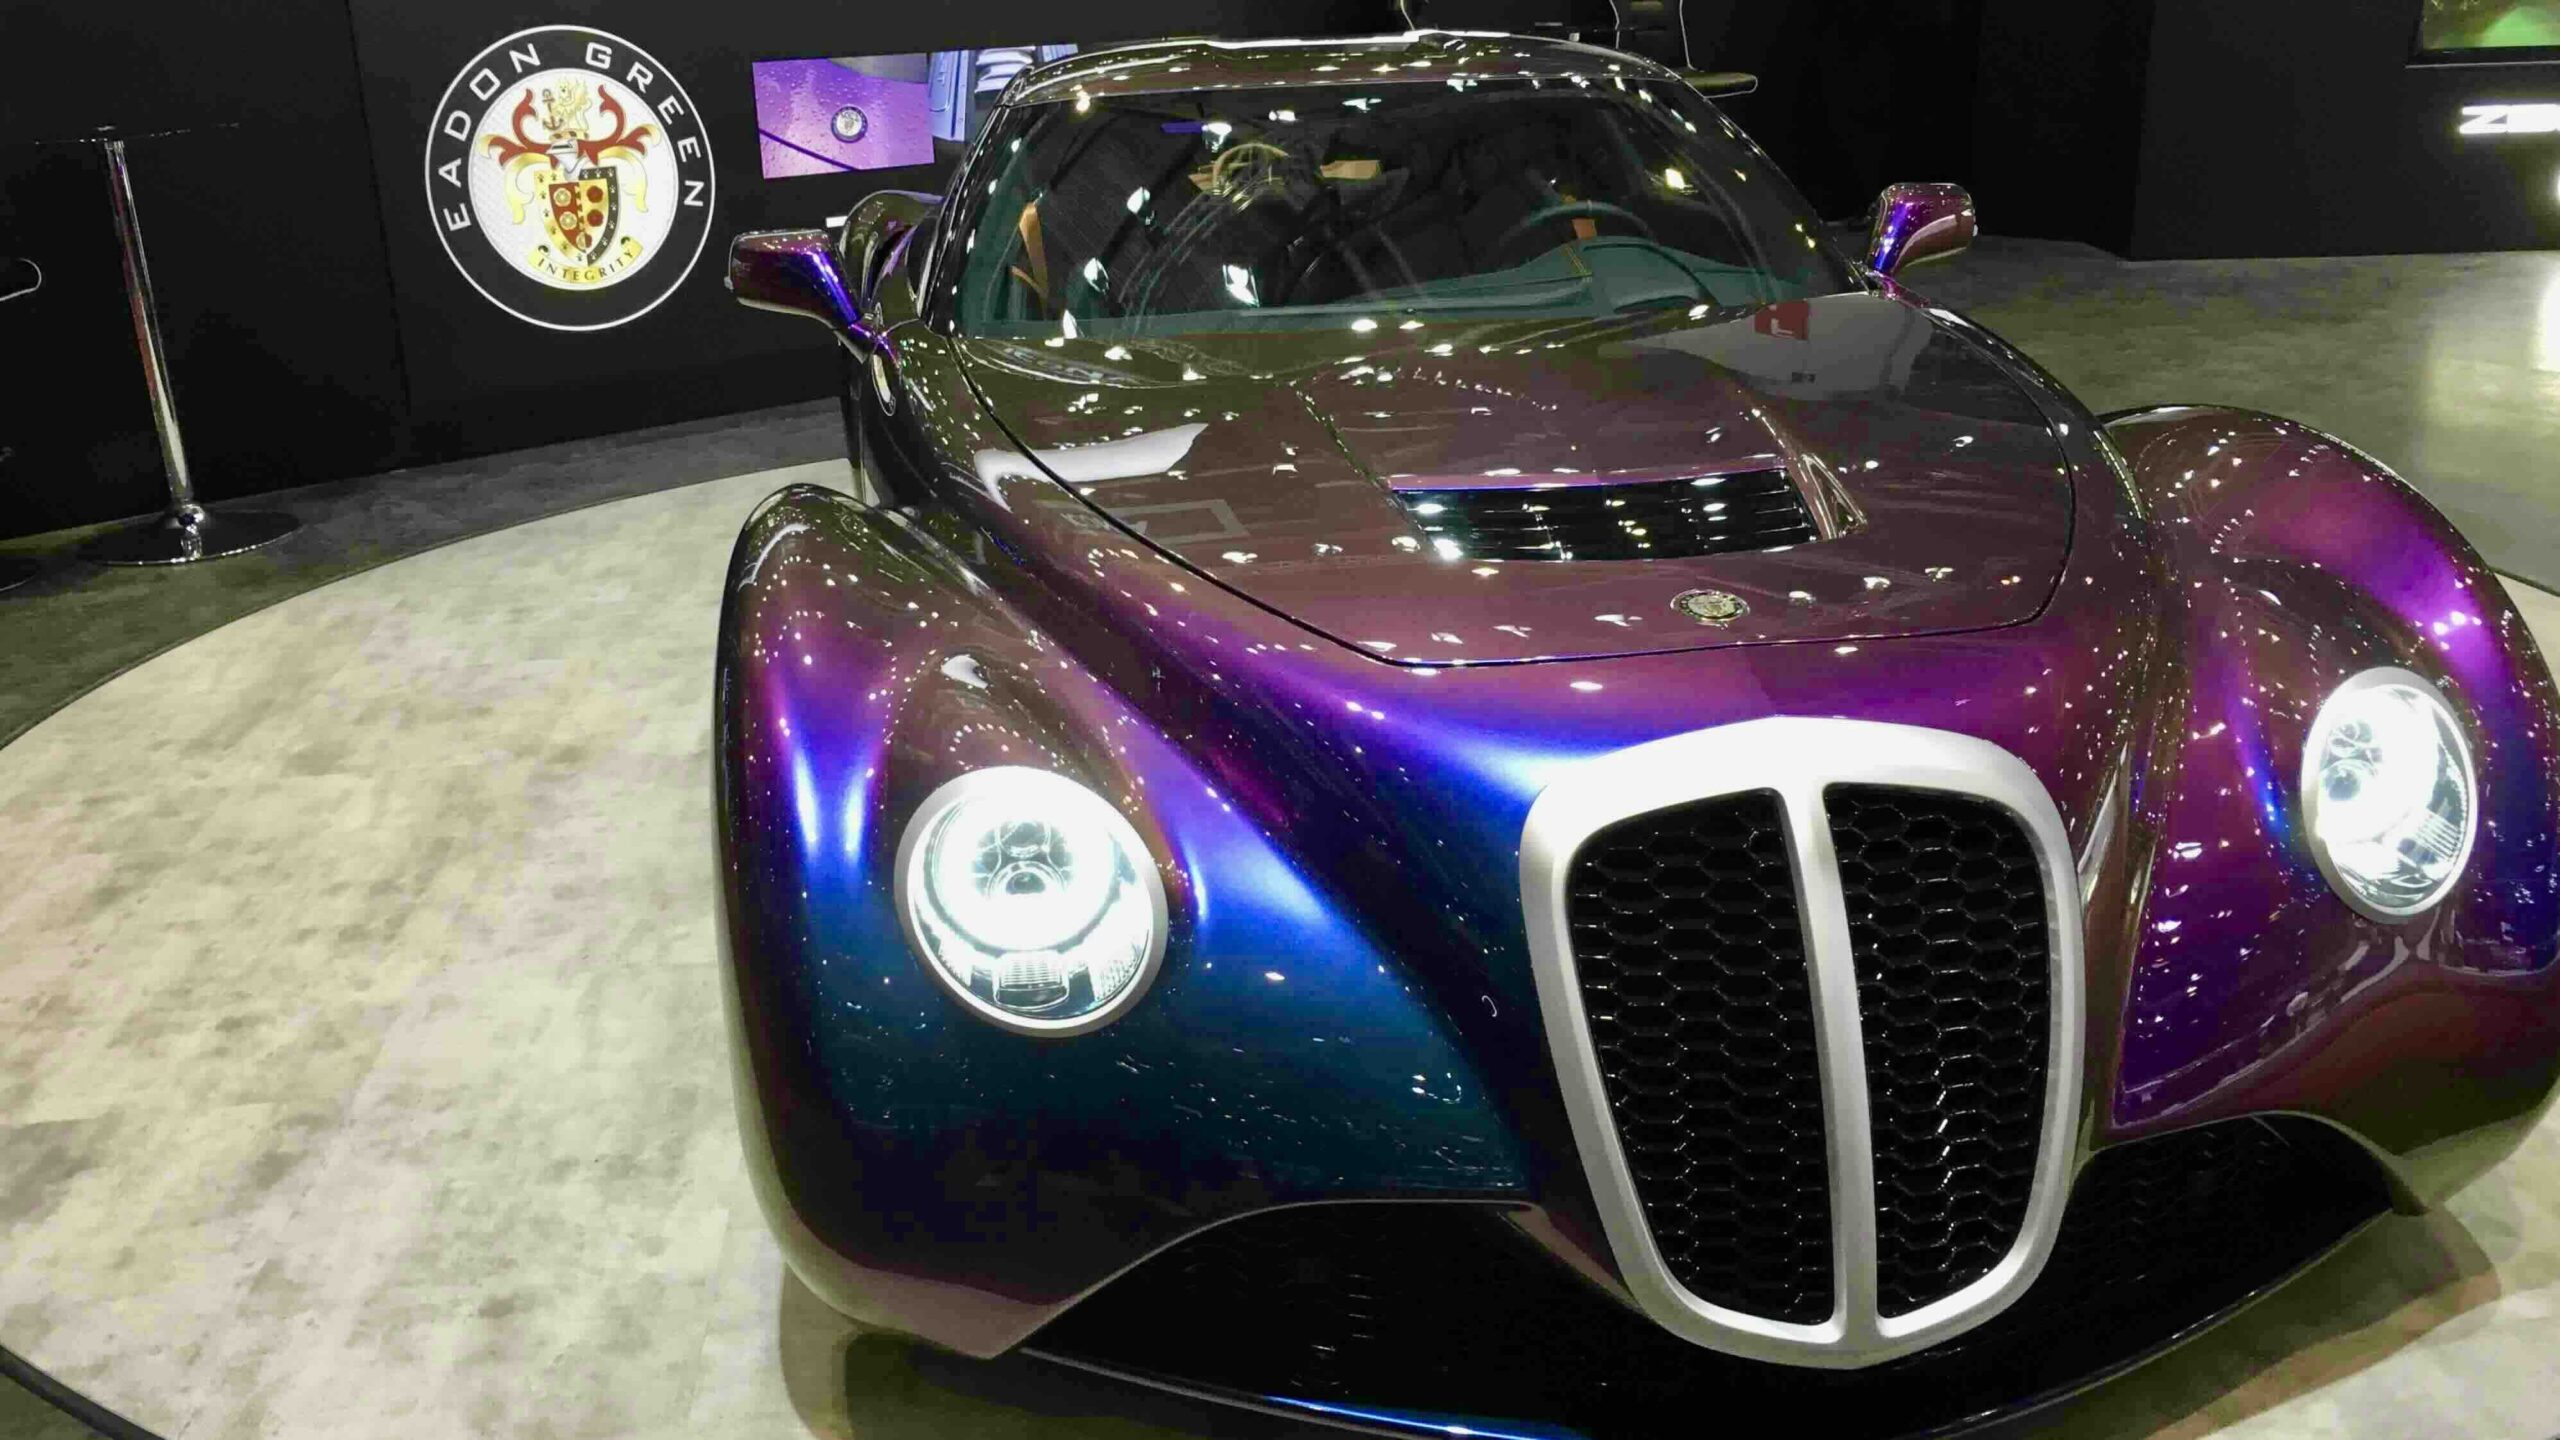 The Spectacular Eadon Green Zeclat at the Geneva Car Show Photo by TMA Howe